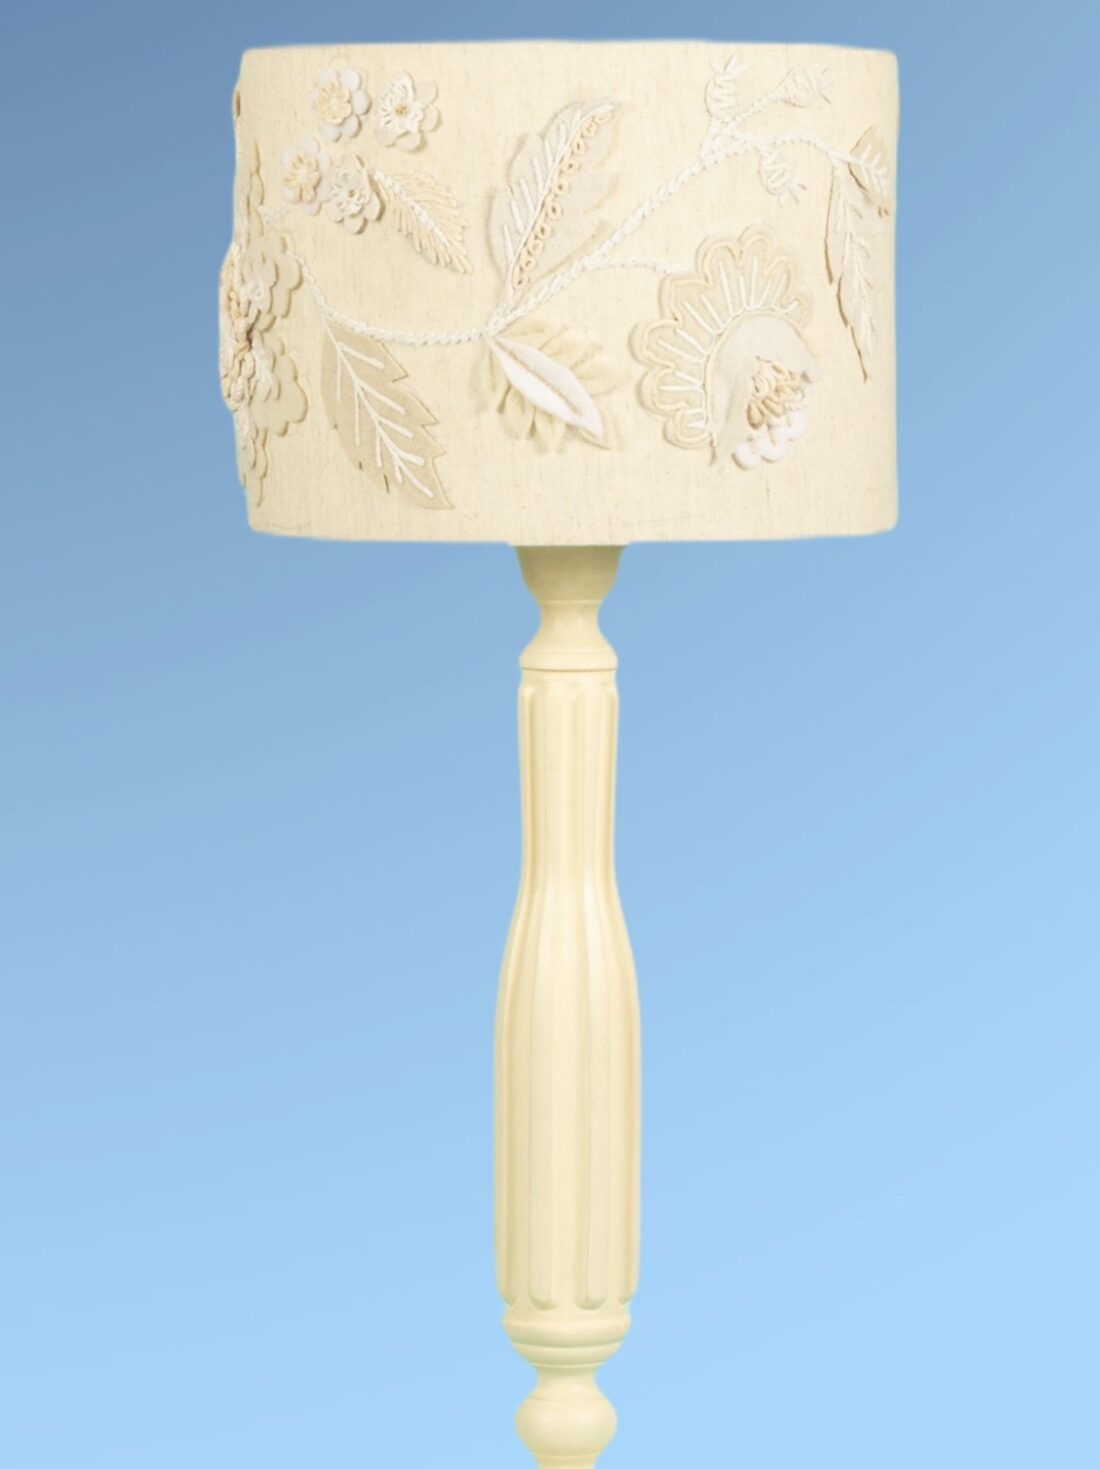 Monochrome Floral Bunch Lampshade